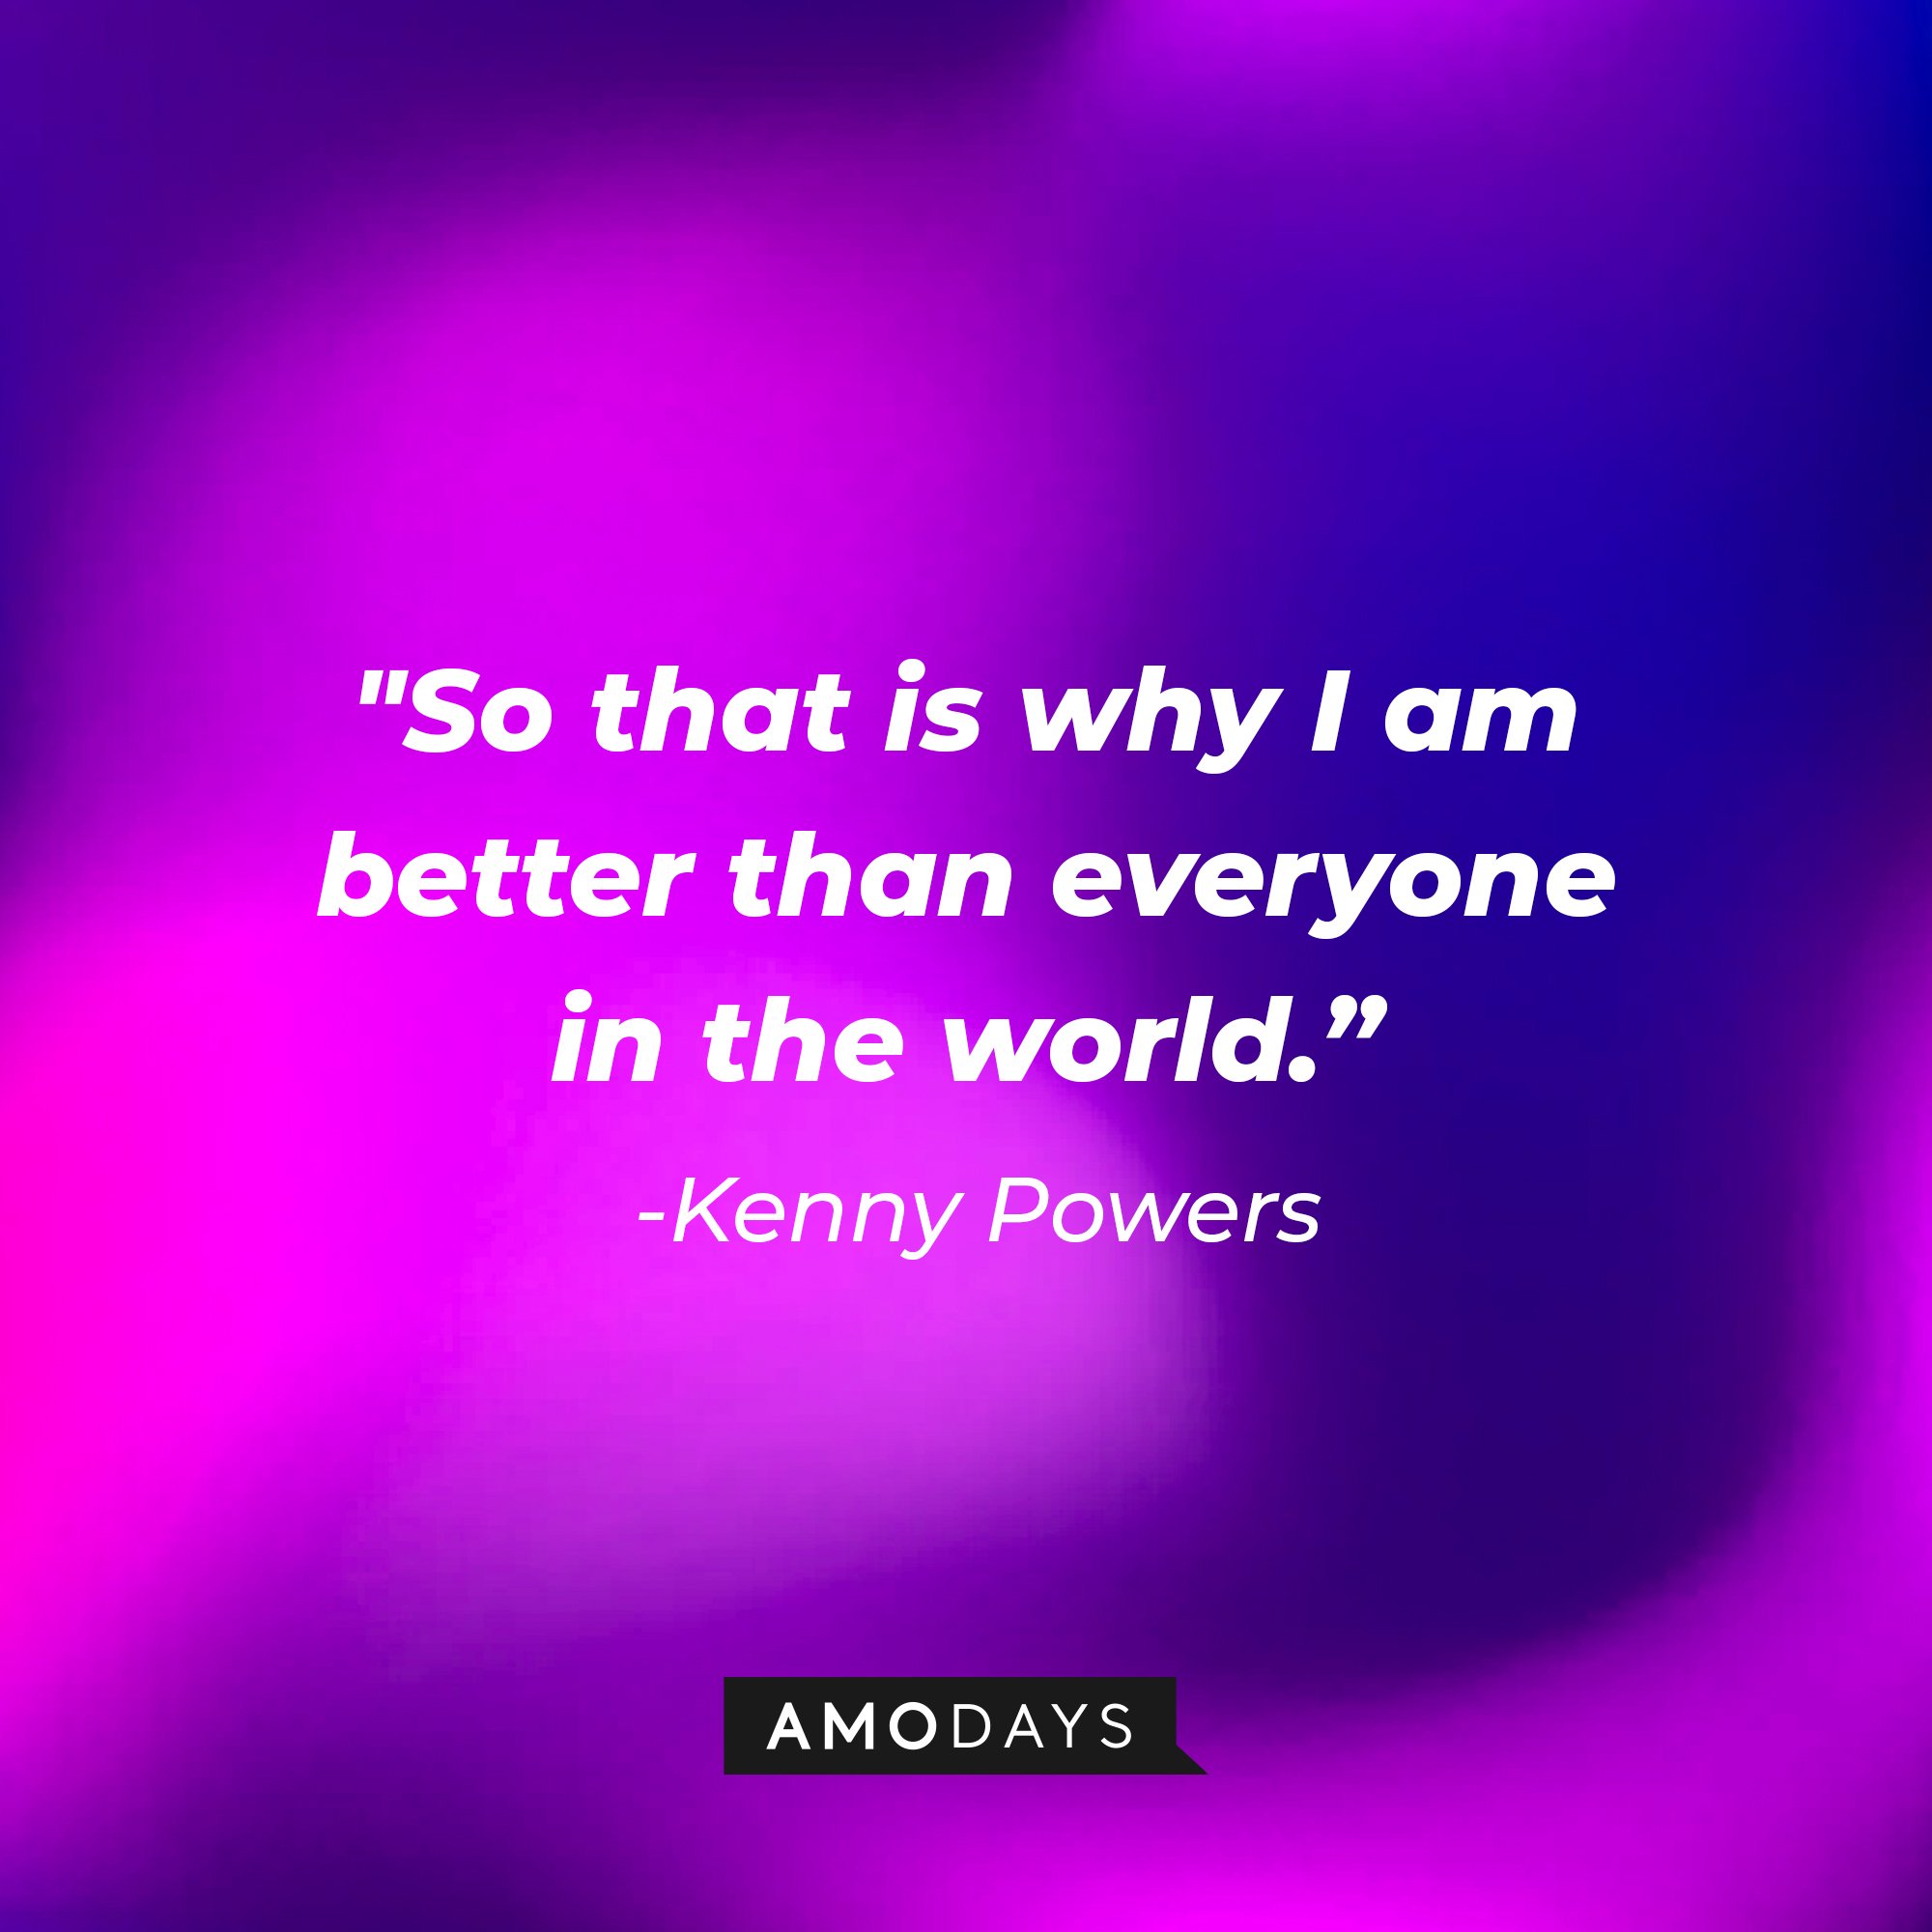  Kenny Powers' quote: "So that is why I am better than everyone in the world.” | Image: AmoDays